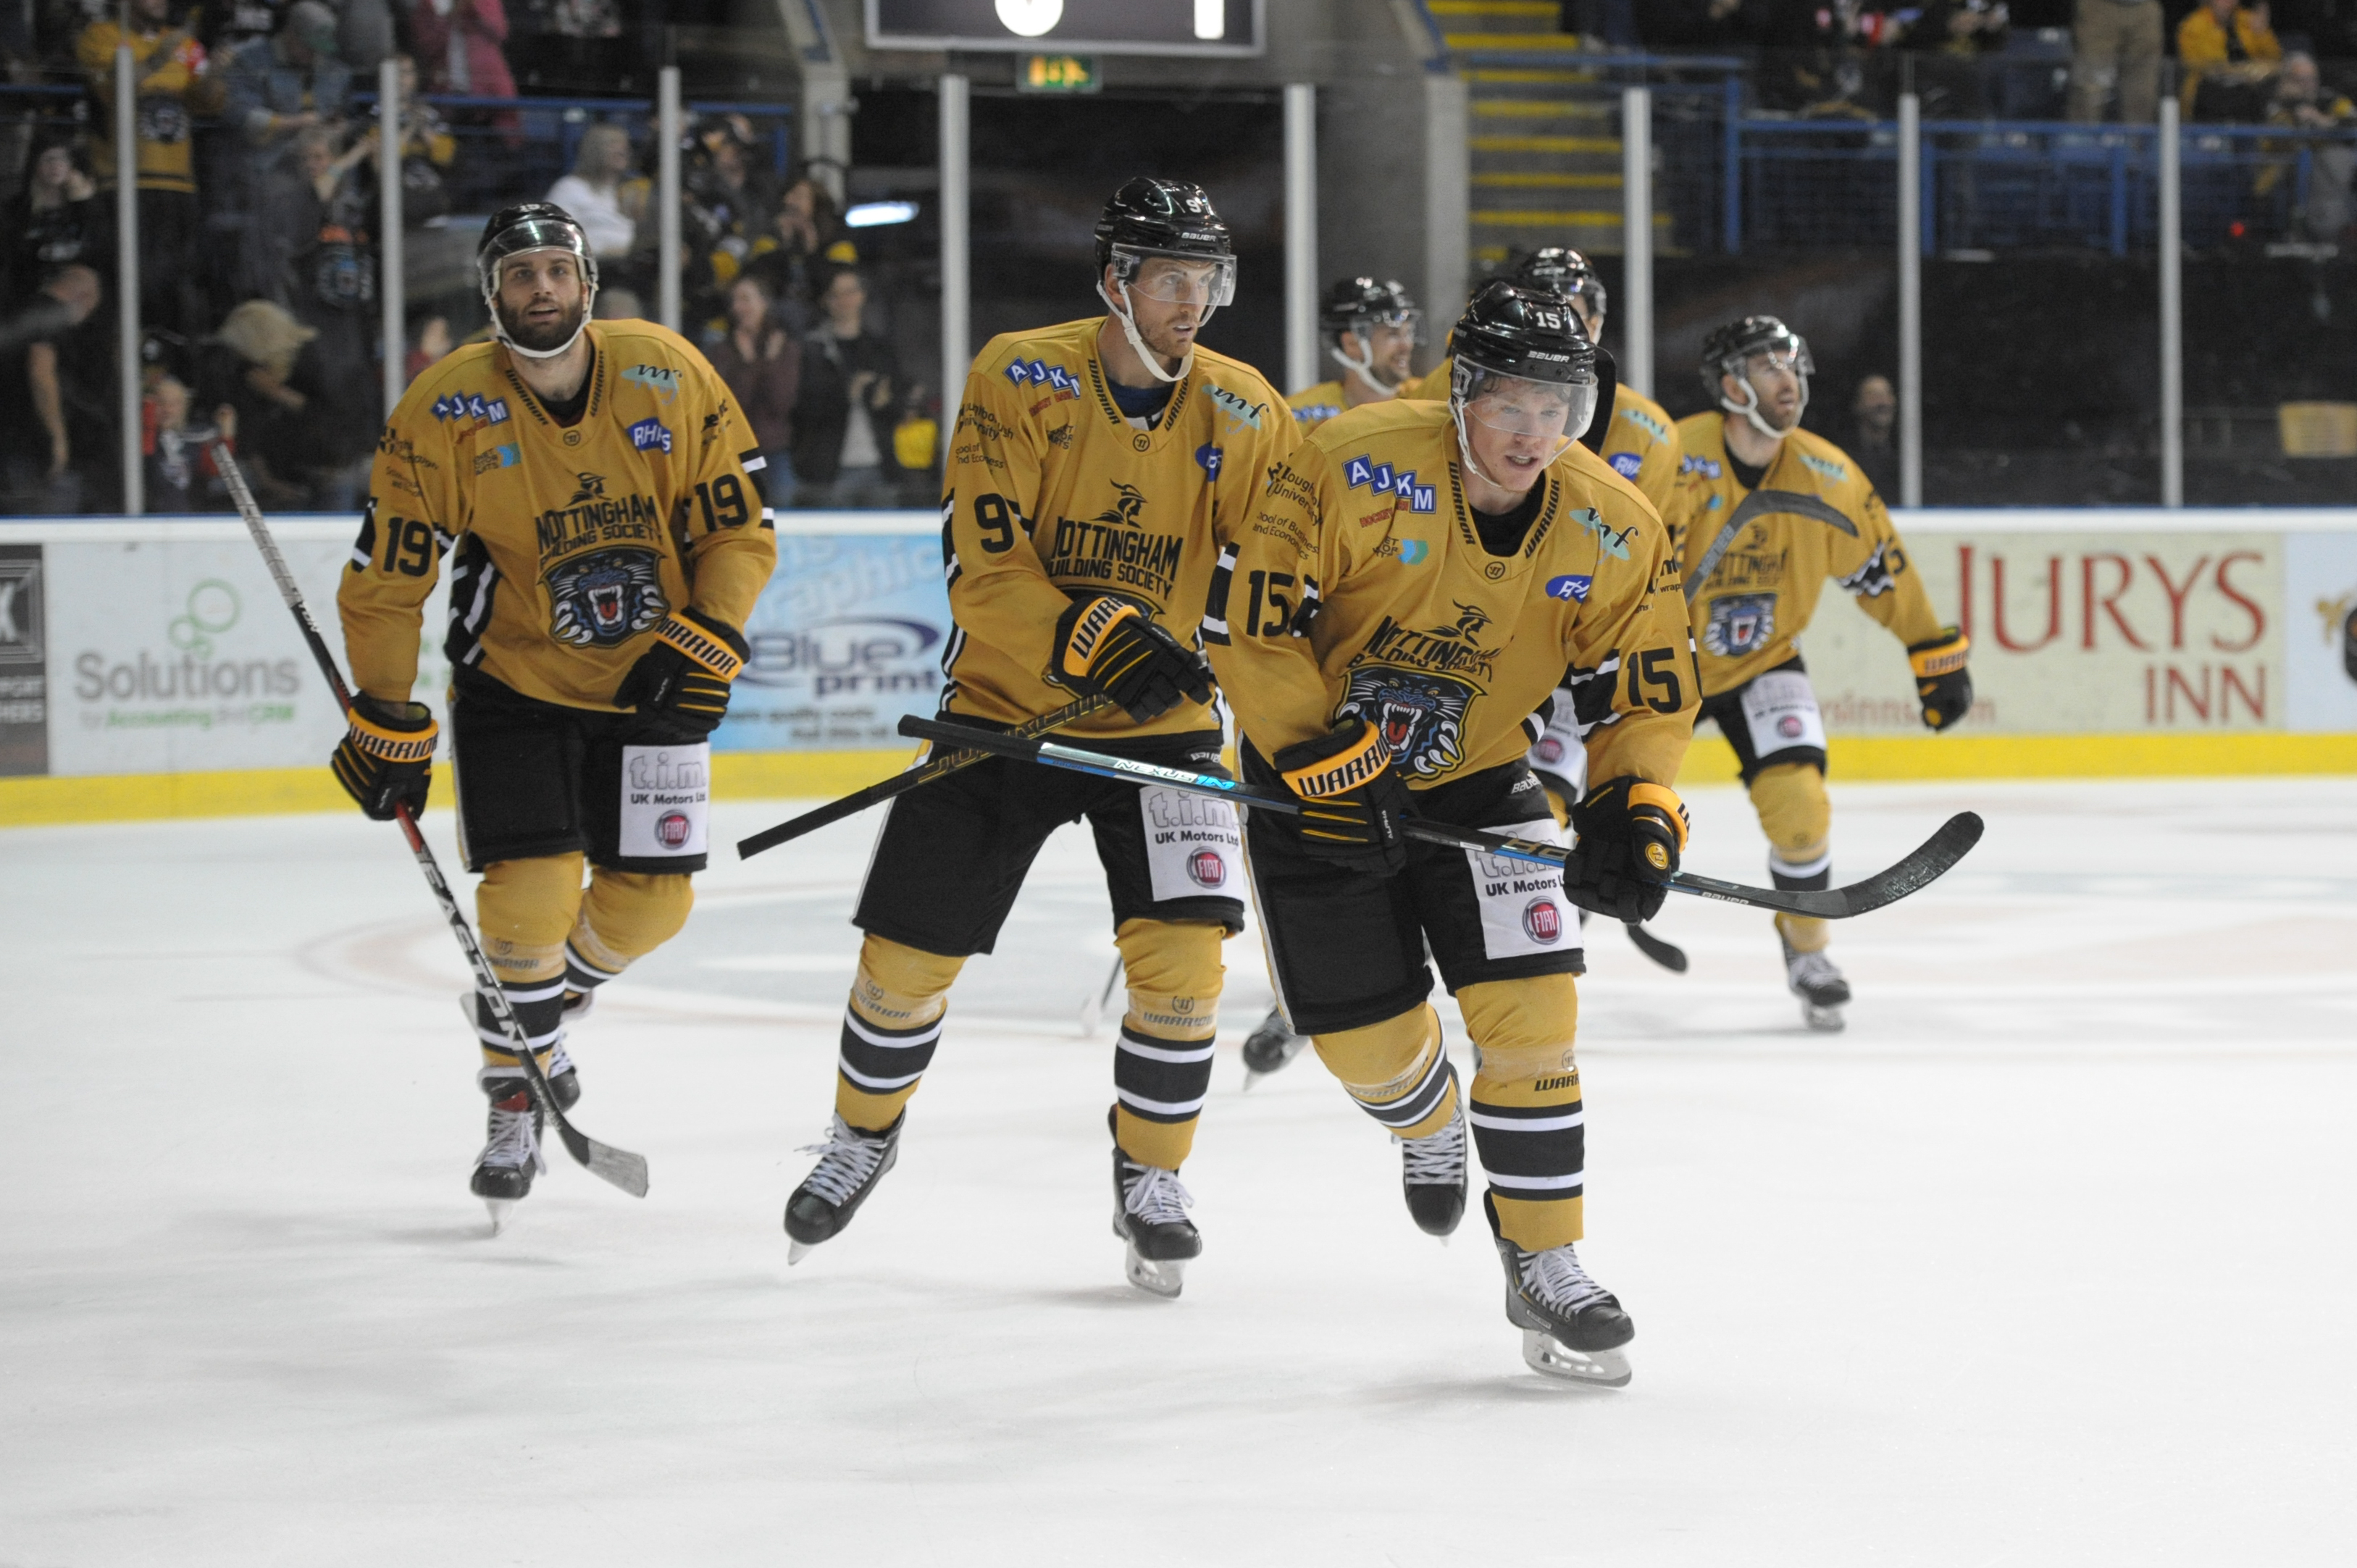 Panthers vs Storm: On Sale Now! - 16/03/19 Top Image